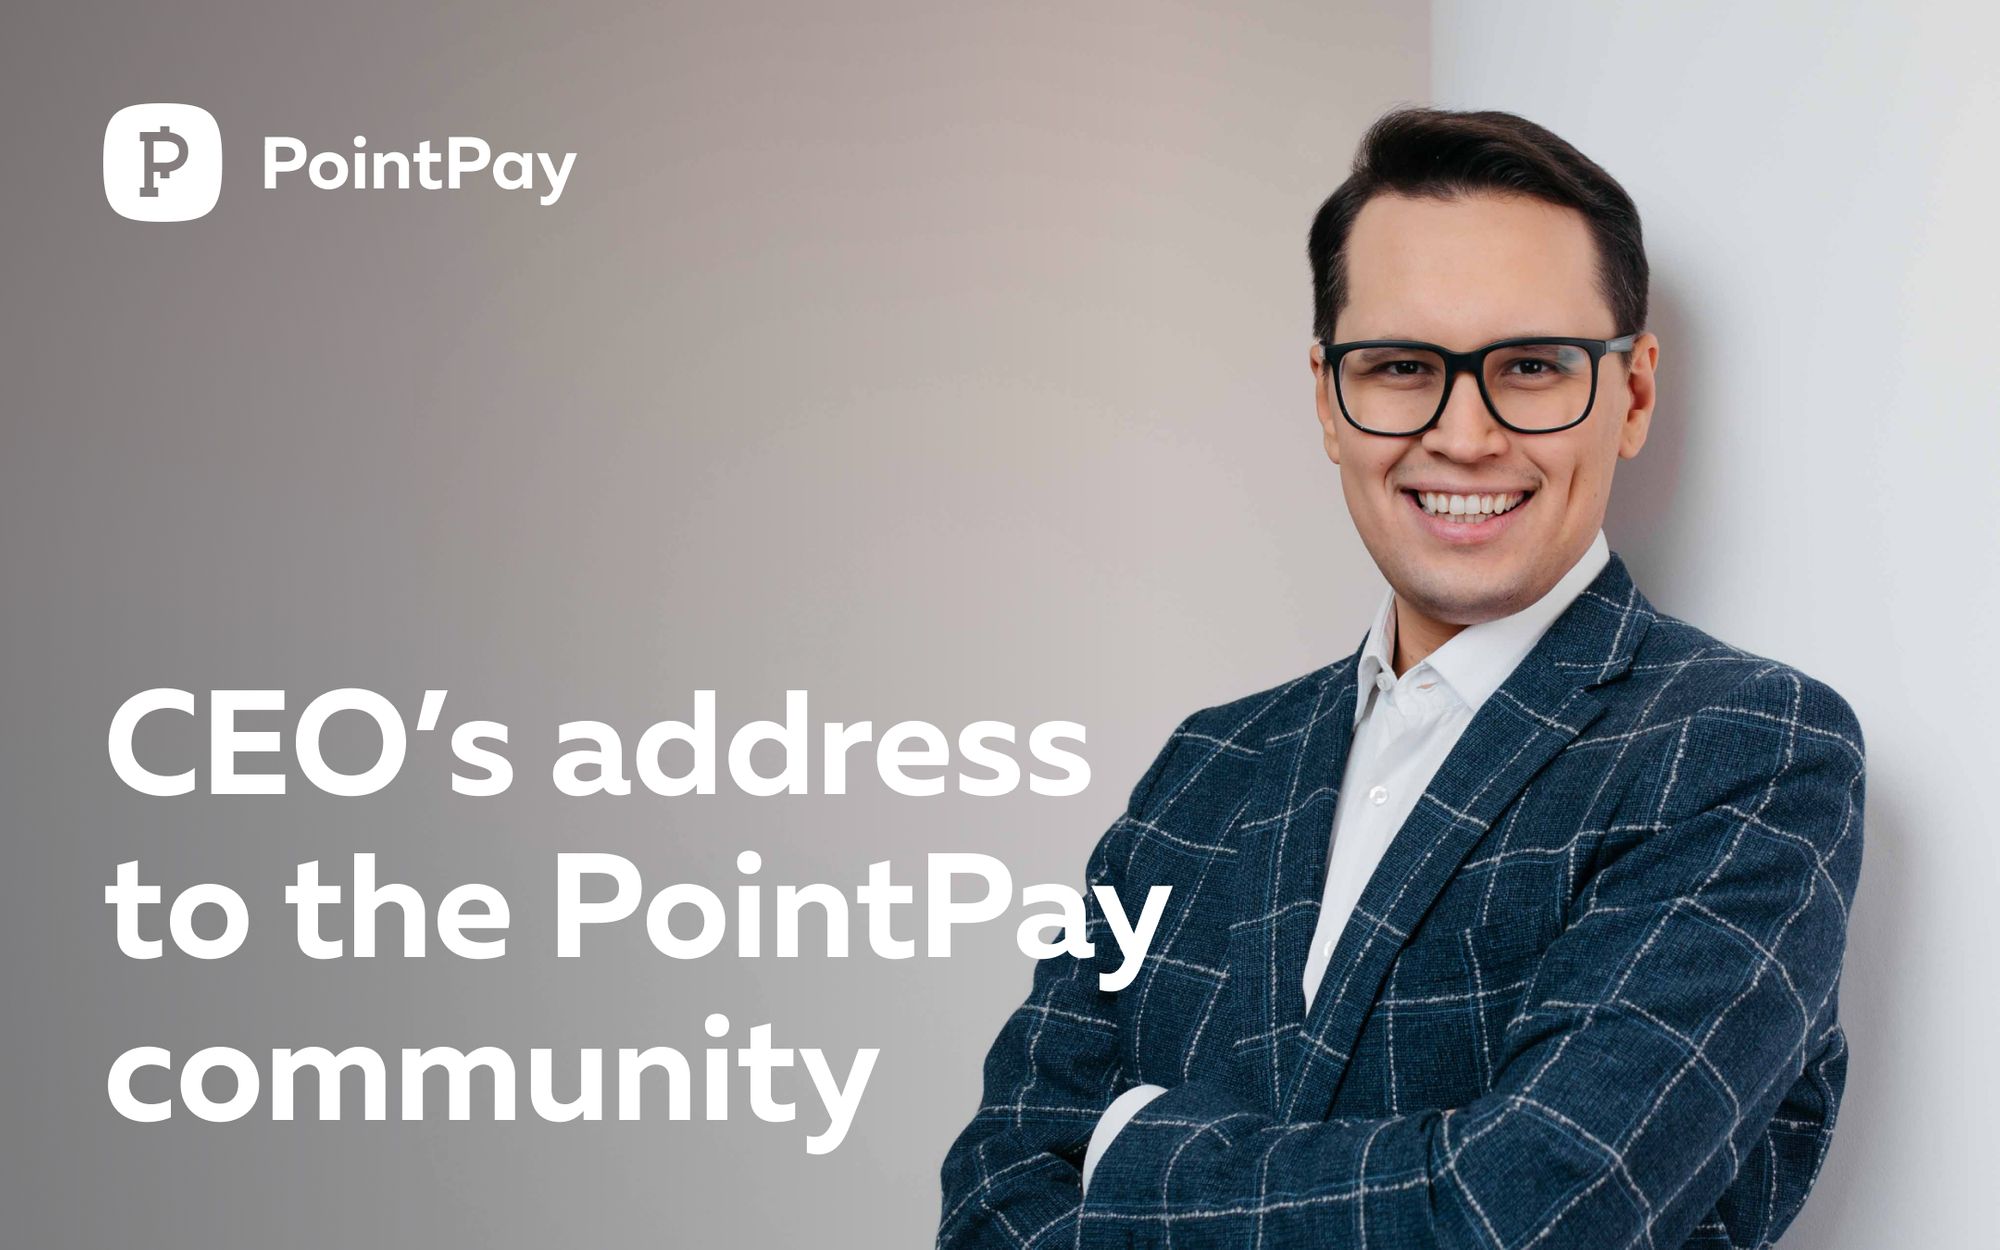 CEO’s address to the PointPay community